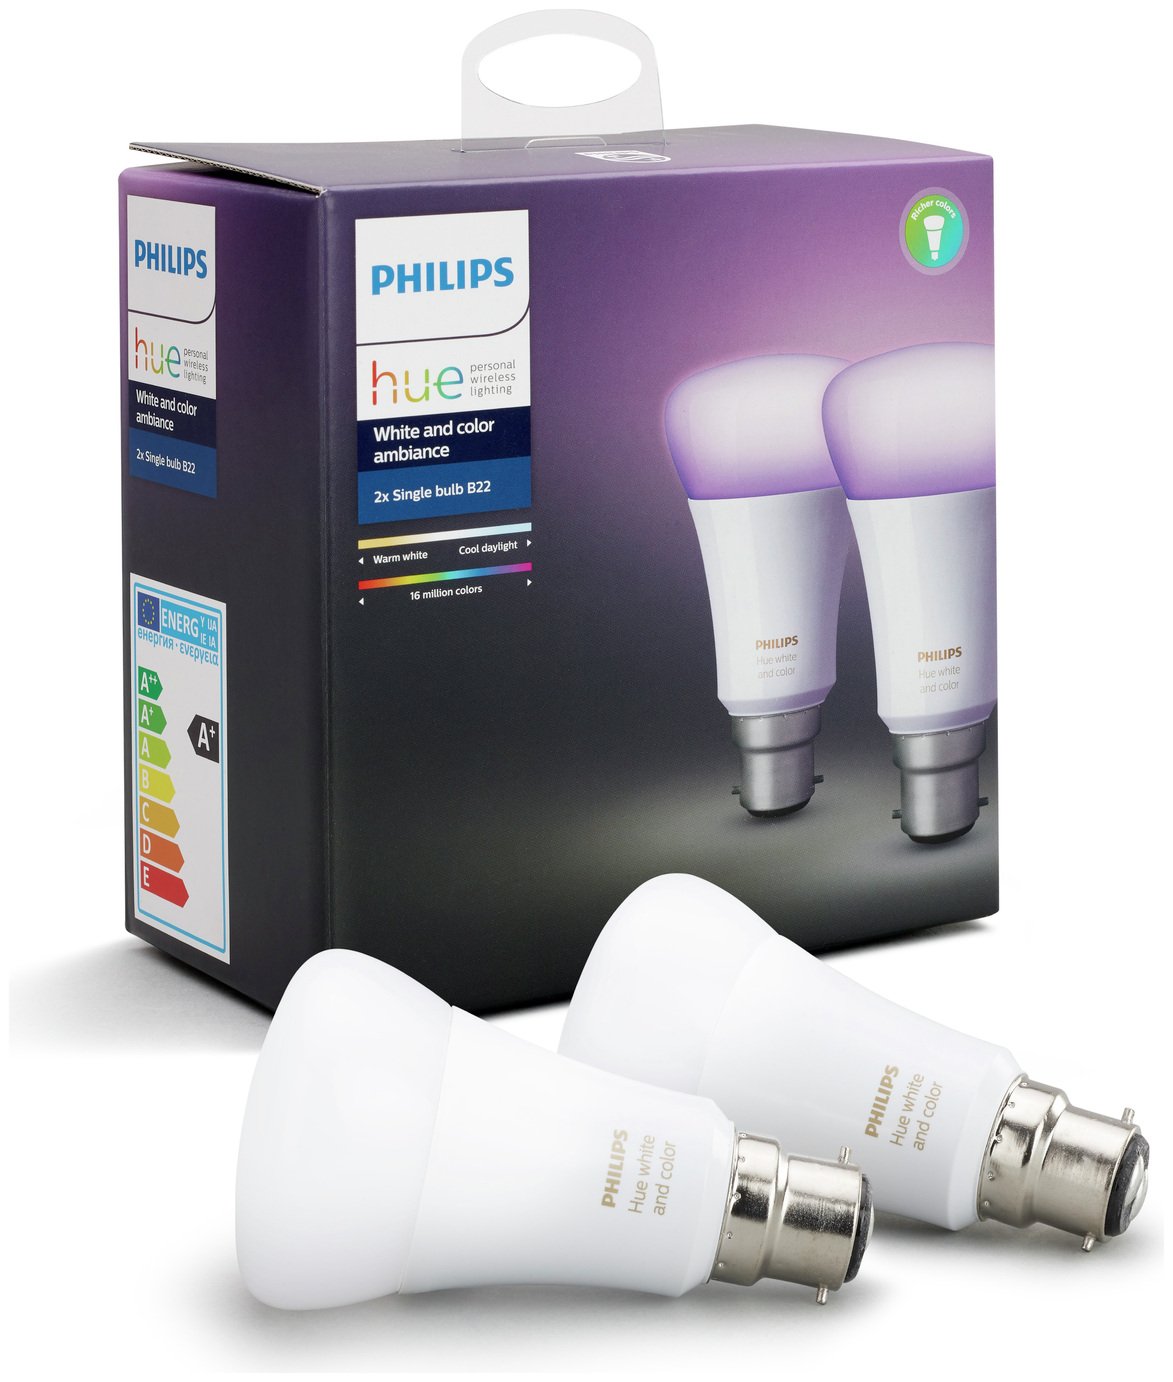 Philips Hue White and Colour Ambience B22 Bulb Twin Pack.